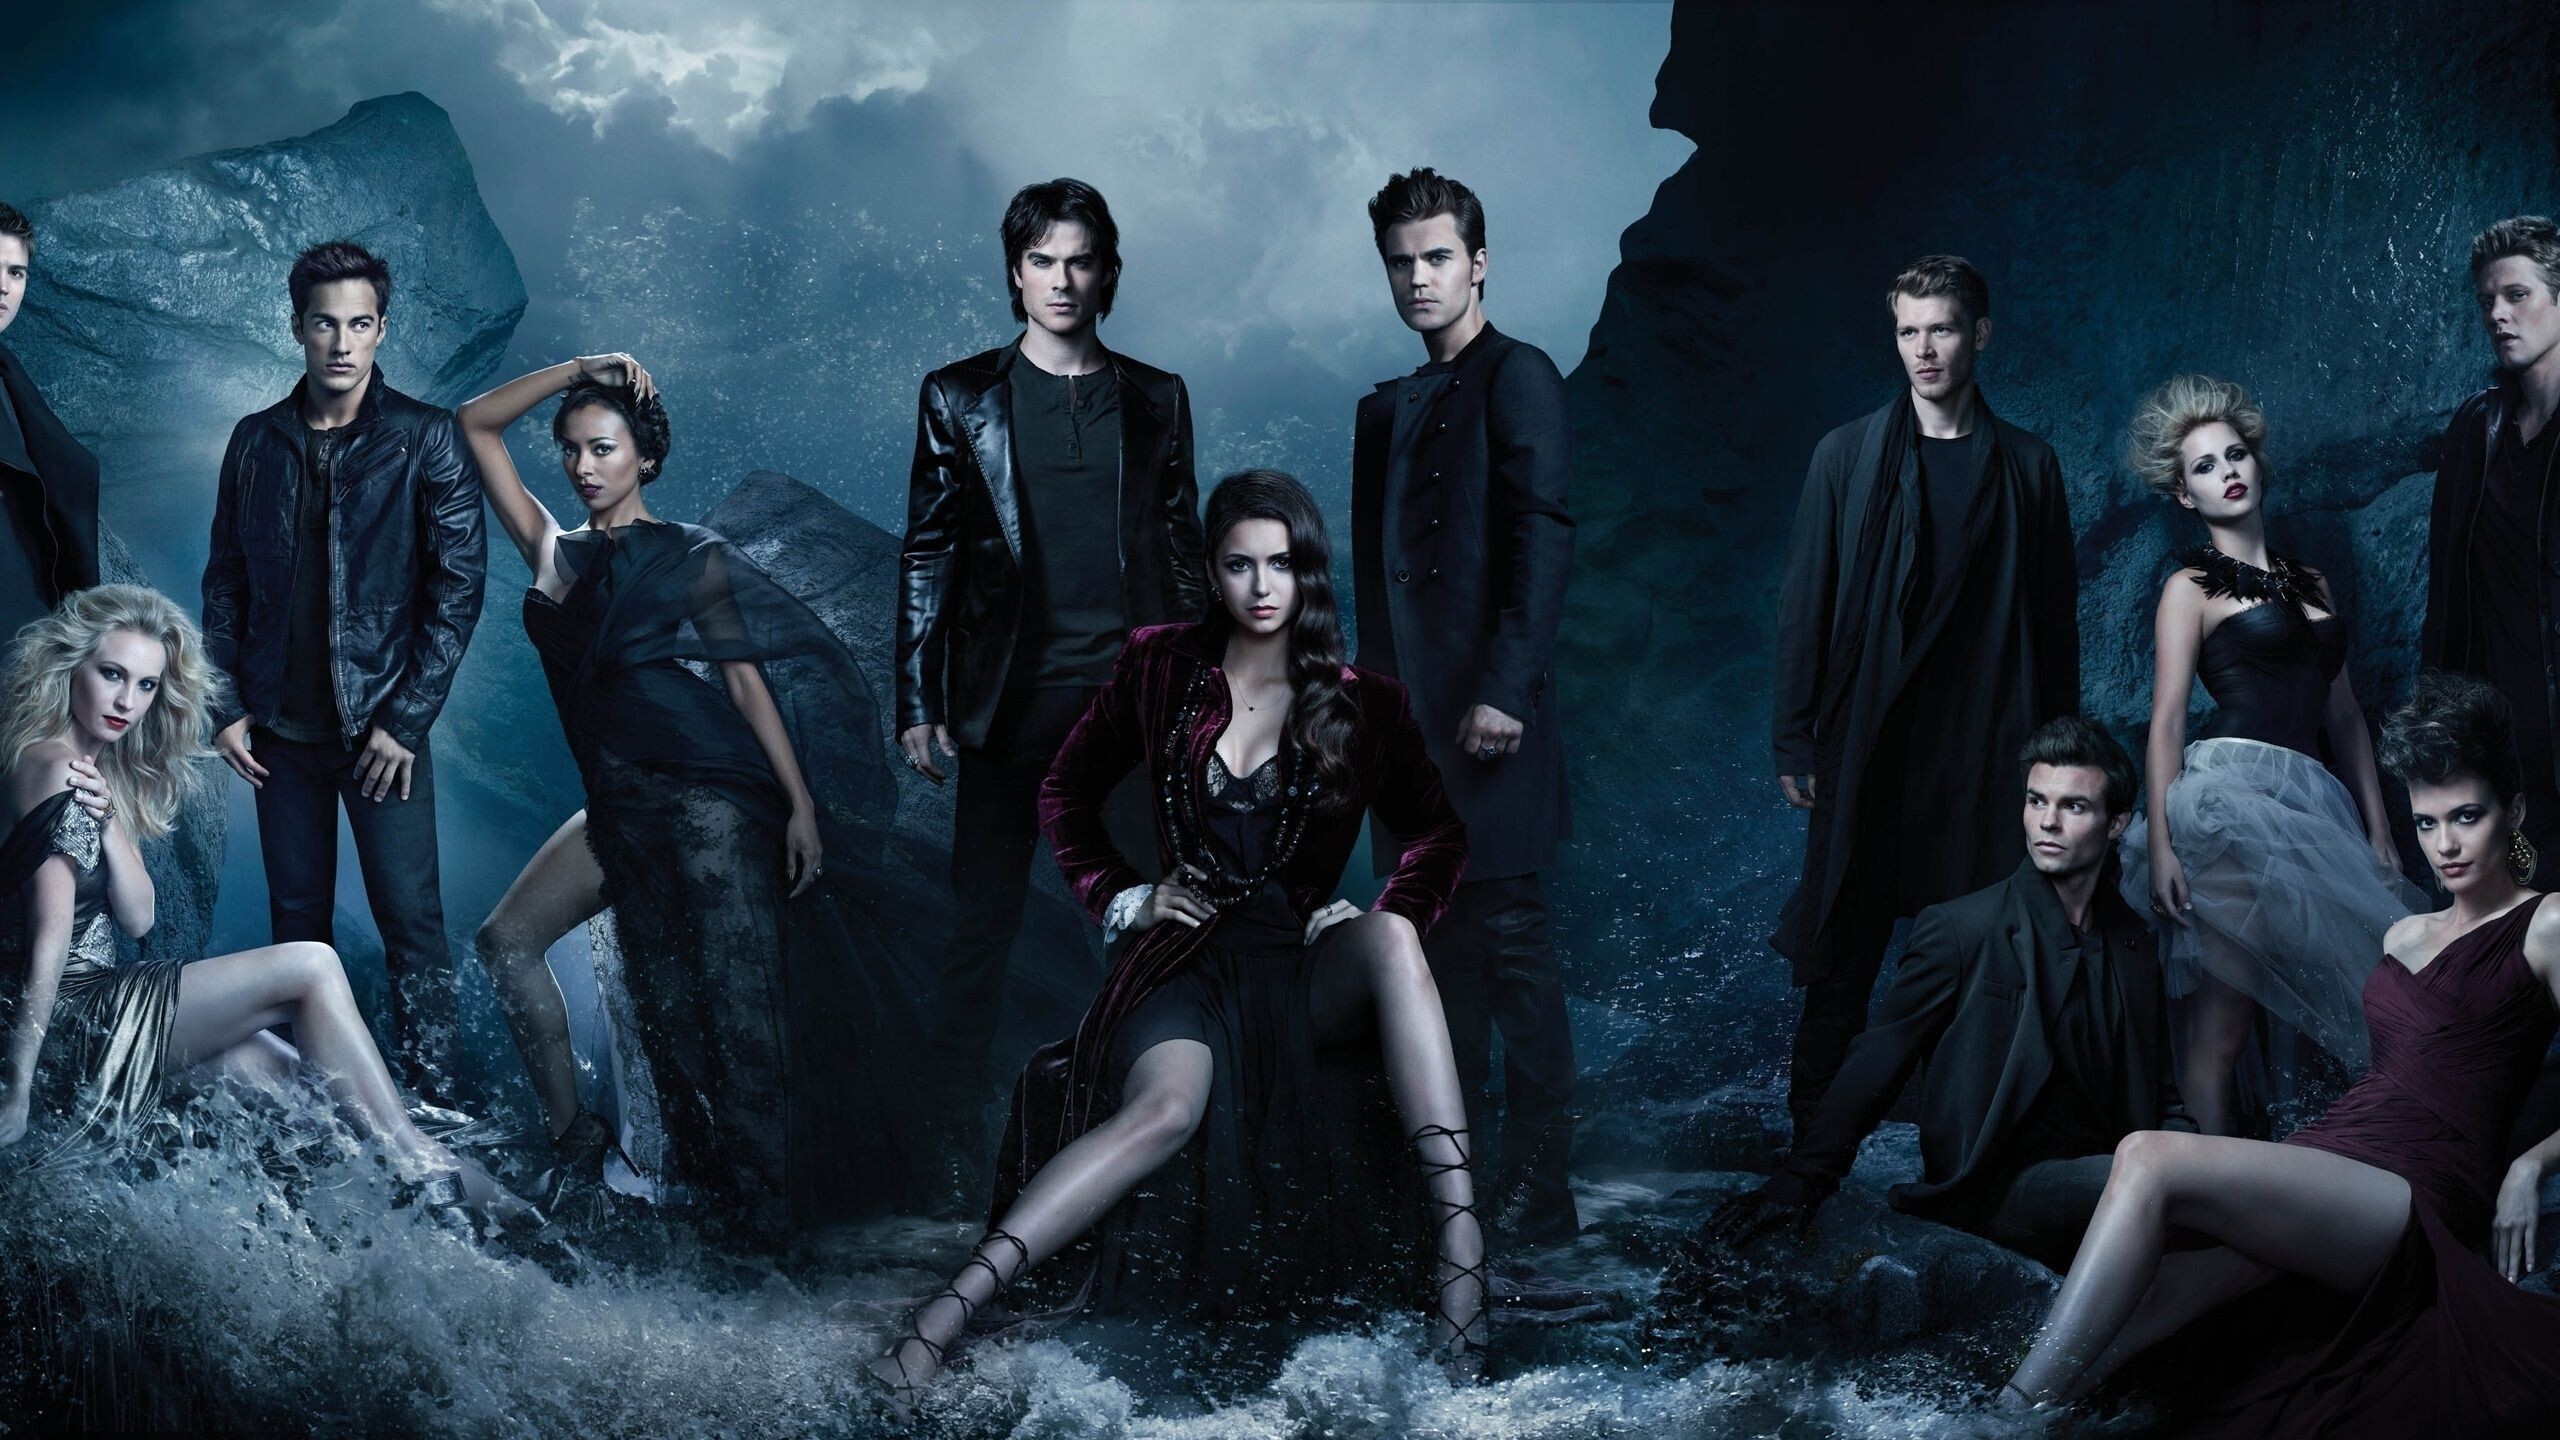 The Vampire Diaries (TV Series): CBS Television Distribution, Four "People's Choice Awards", Teen Choice Awards. 2560x1440 HD Background.